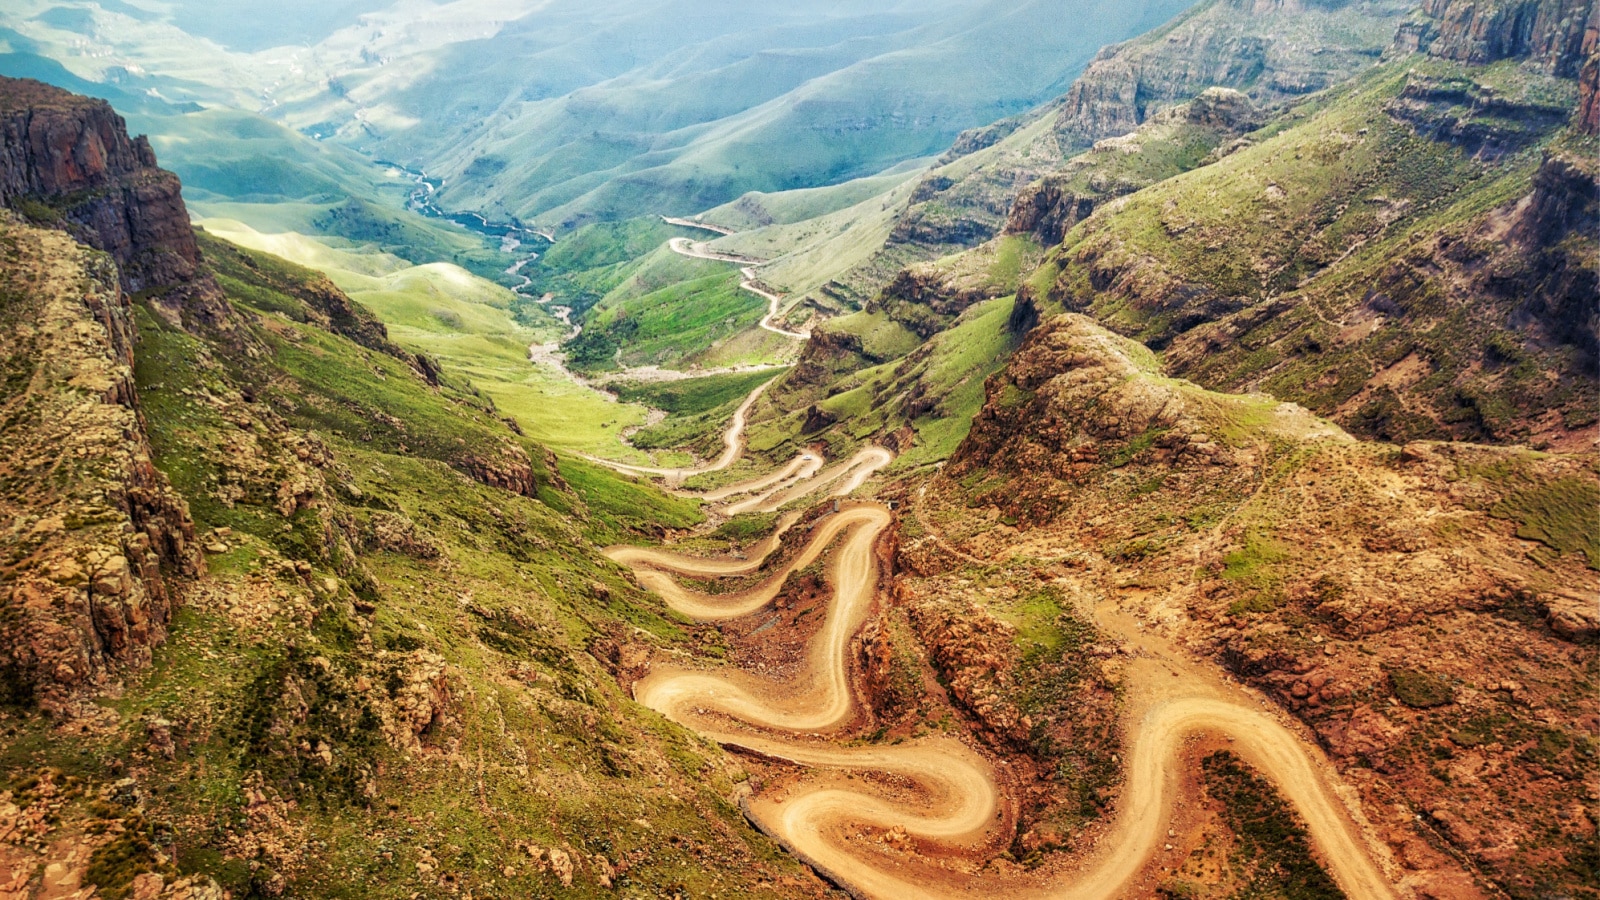 Sani Pass down into South Africa